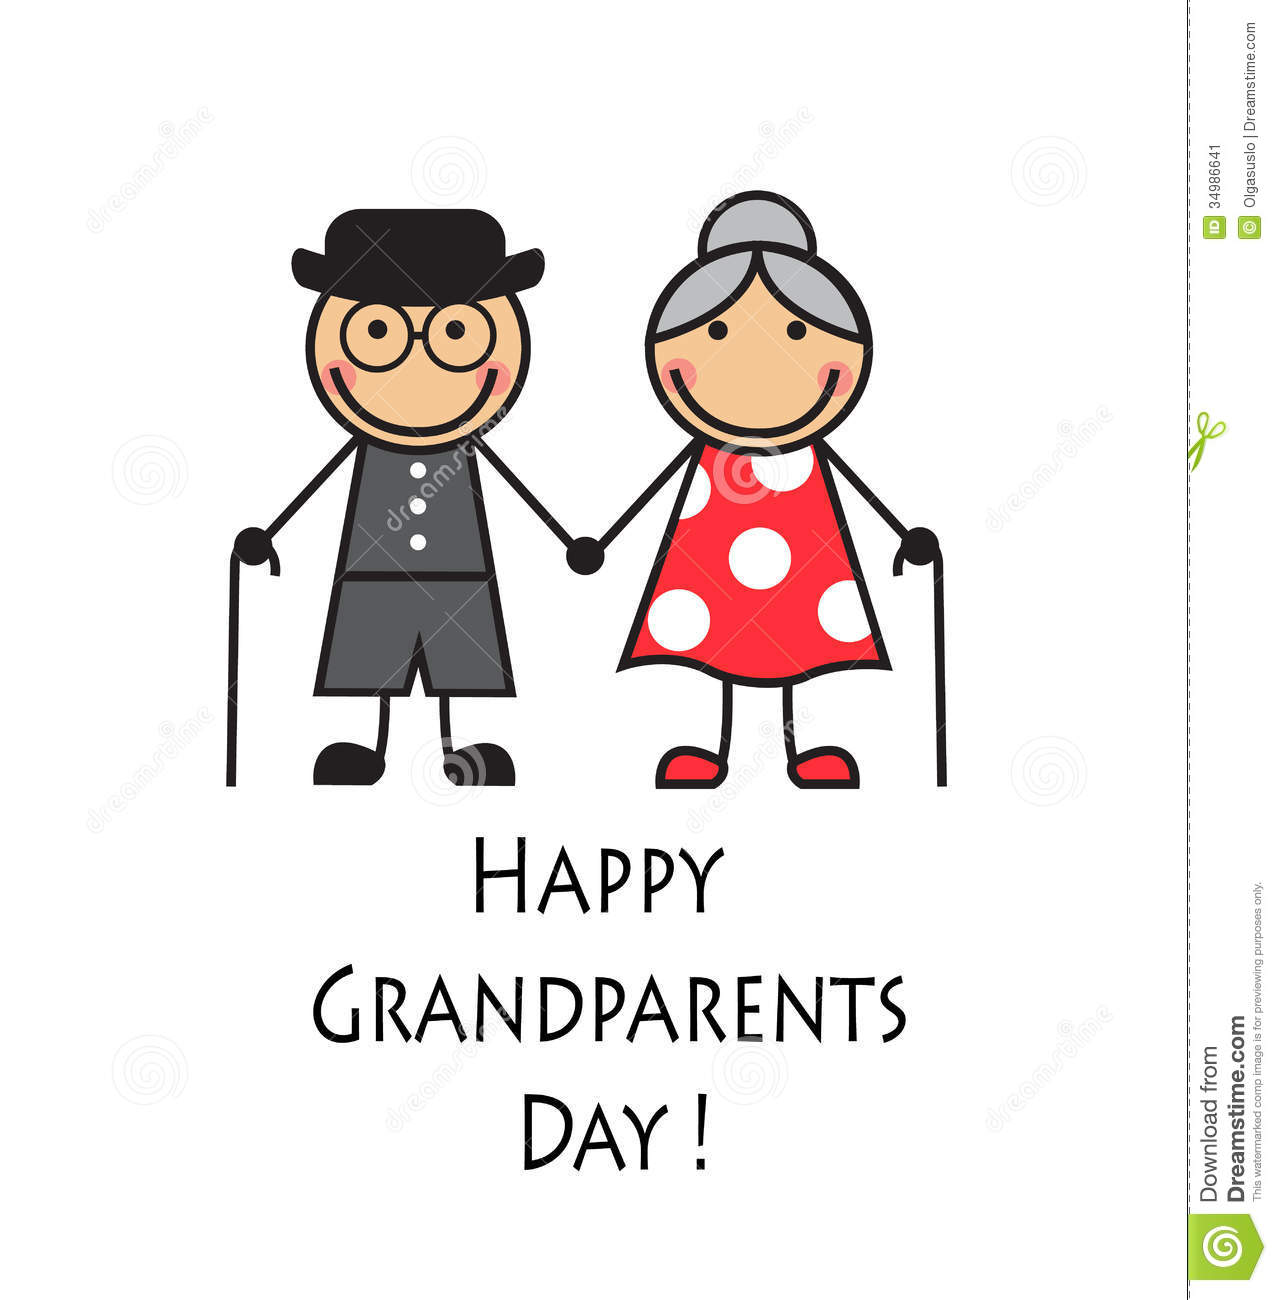 Cartoon Grandparents With Canes On A White Background